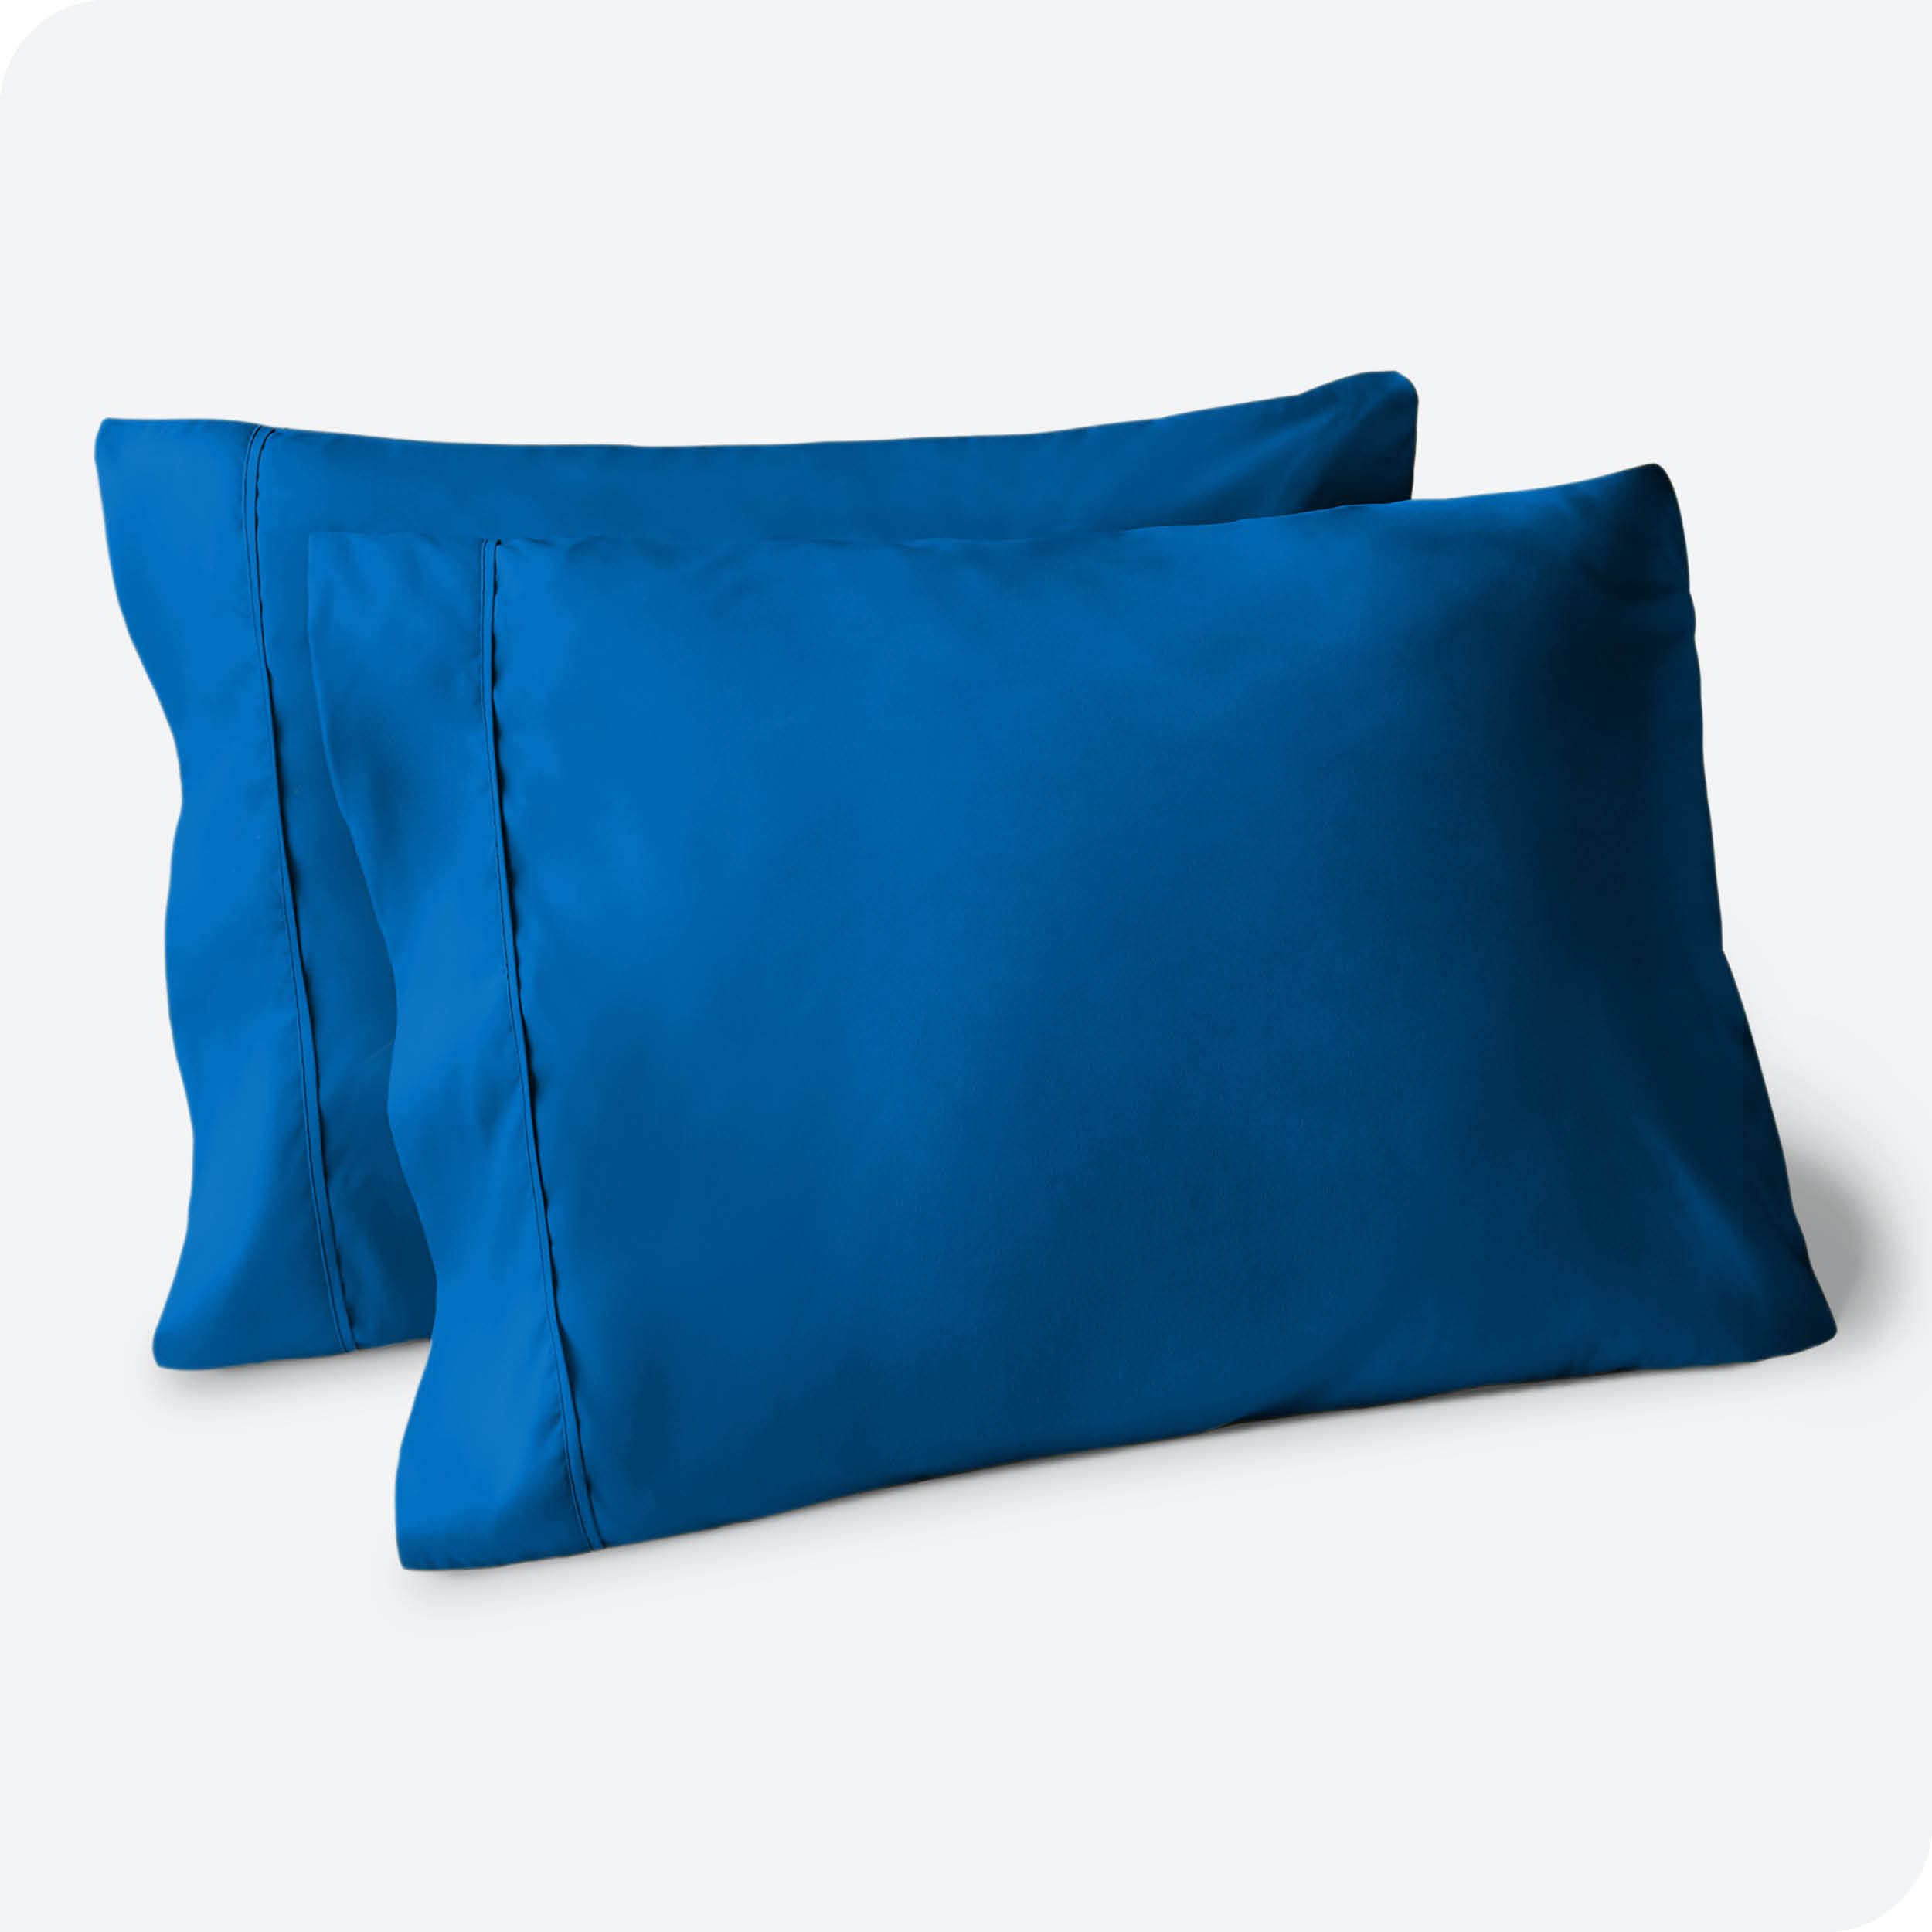 Book Cover Bare Home Microfiber Pillow Cases - Standard/Queen Size Set of 2 - Cooling Pillowcases - Double Brushed - Medium Blue Pillowcases 2 Pack - Easy Care (Standard Pillowcase Set of 2, Medium Blue) 20x30 Standard/Queen (2 Pack) 15 - Medium Blue